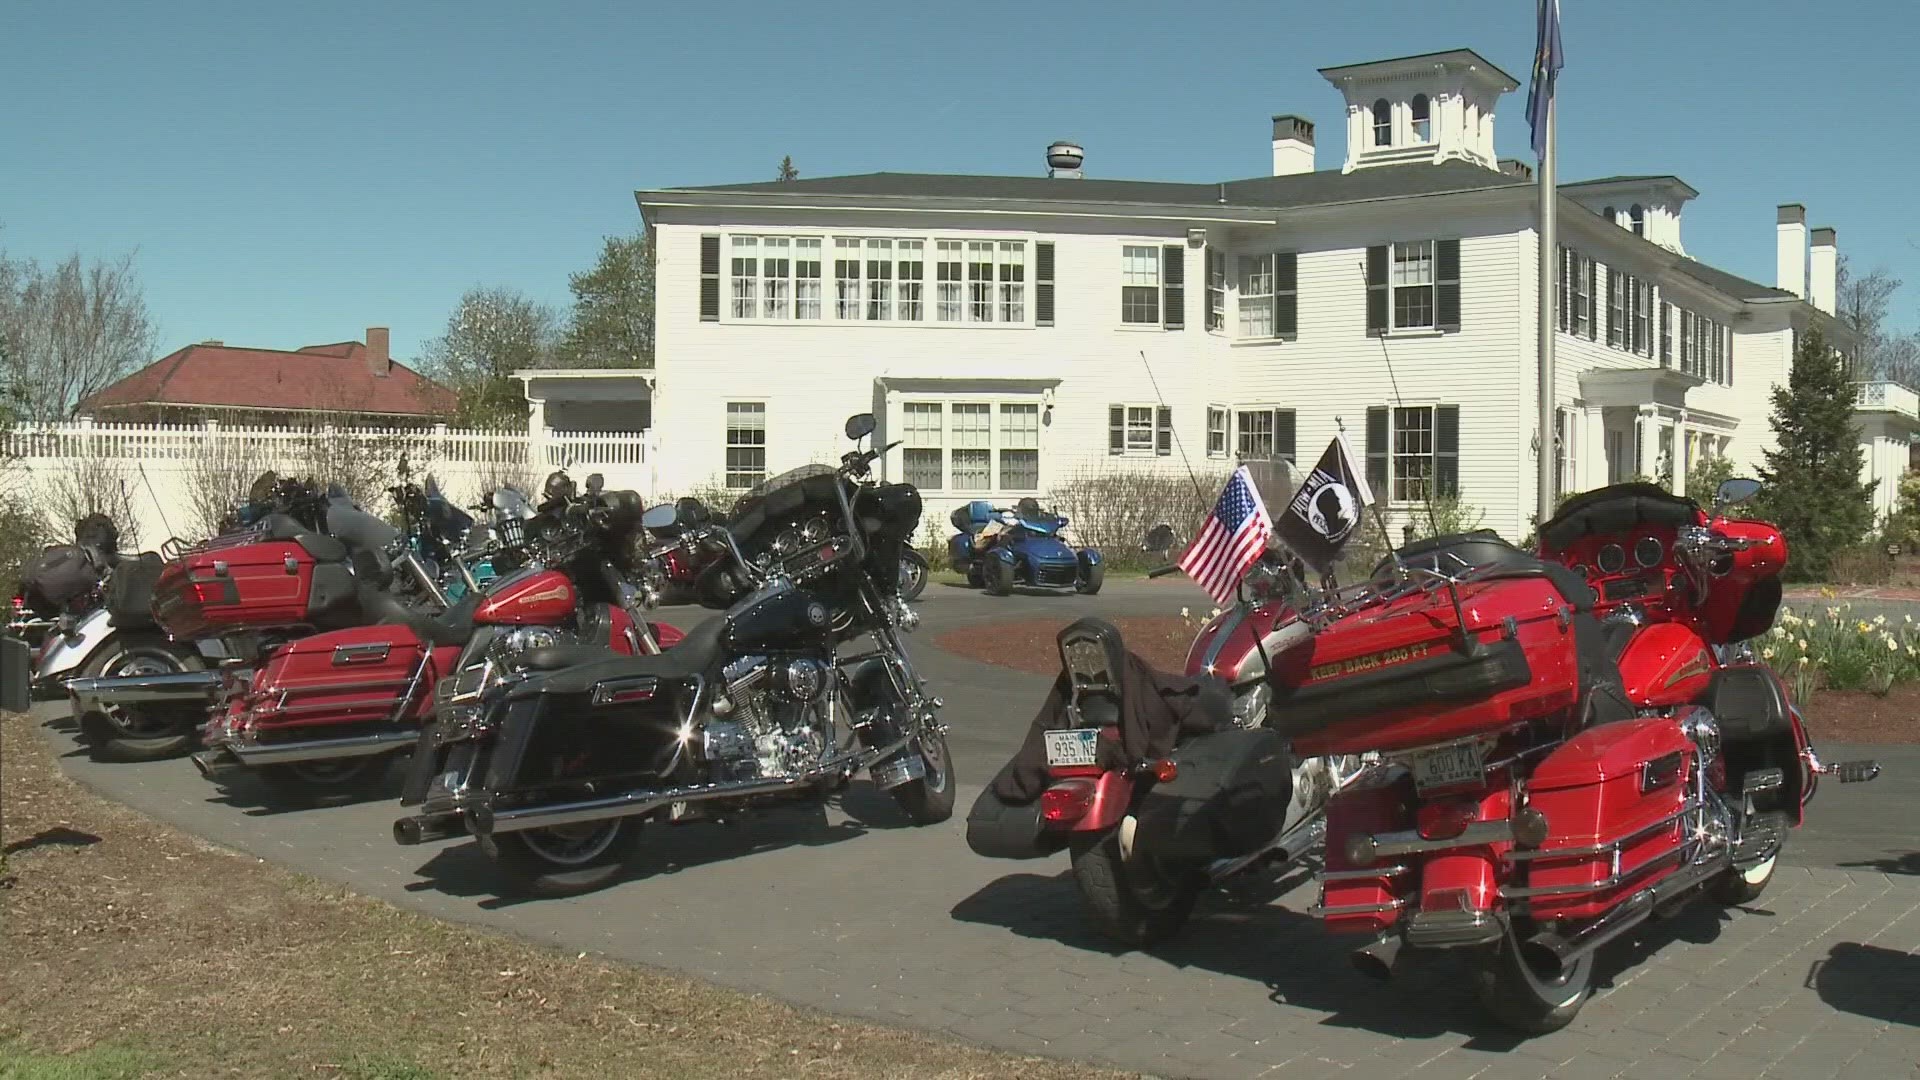 Last year, 32 motorcyclists died in crashes in Maine, one of the highest numbers in record.